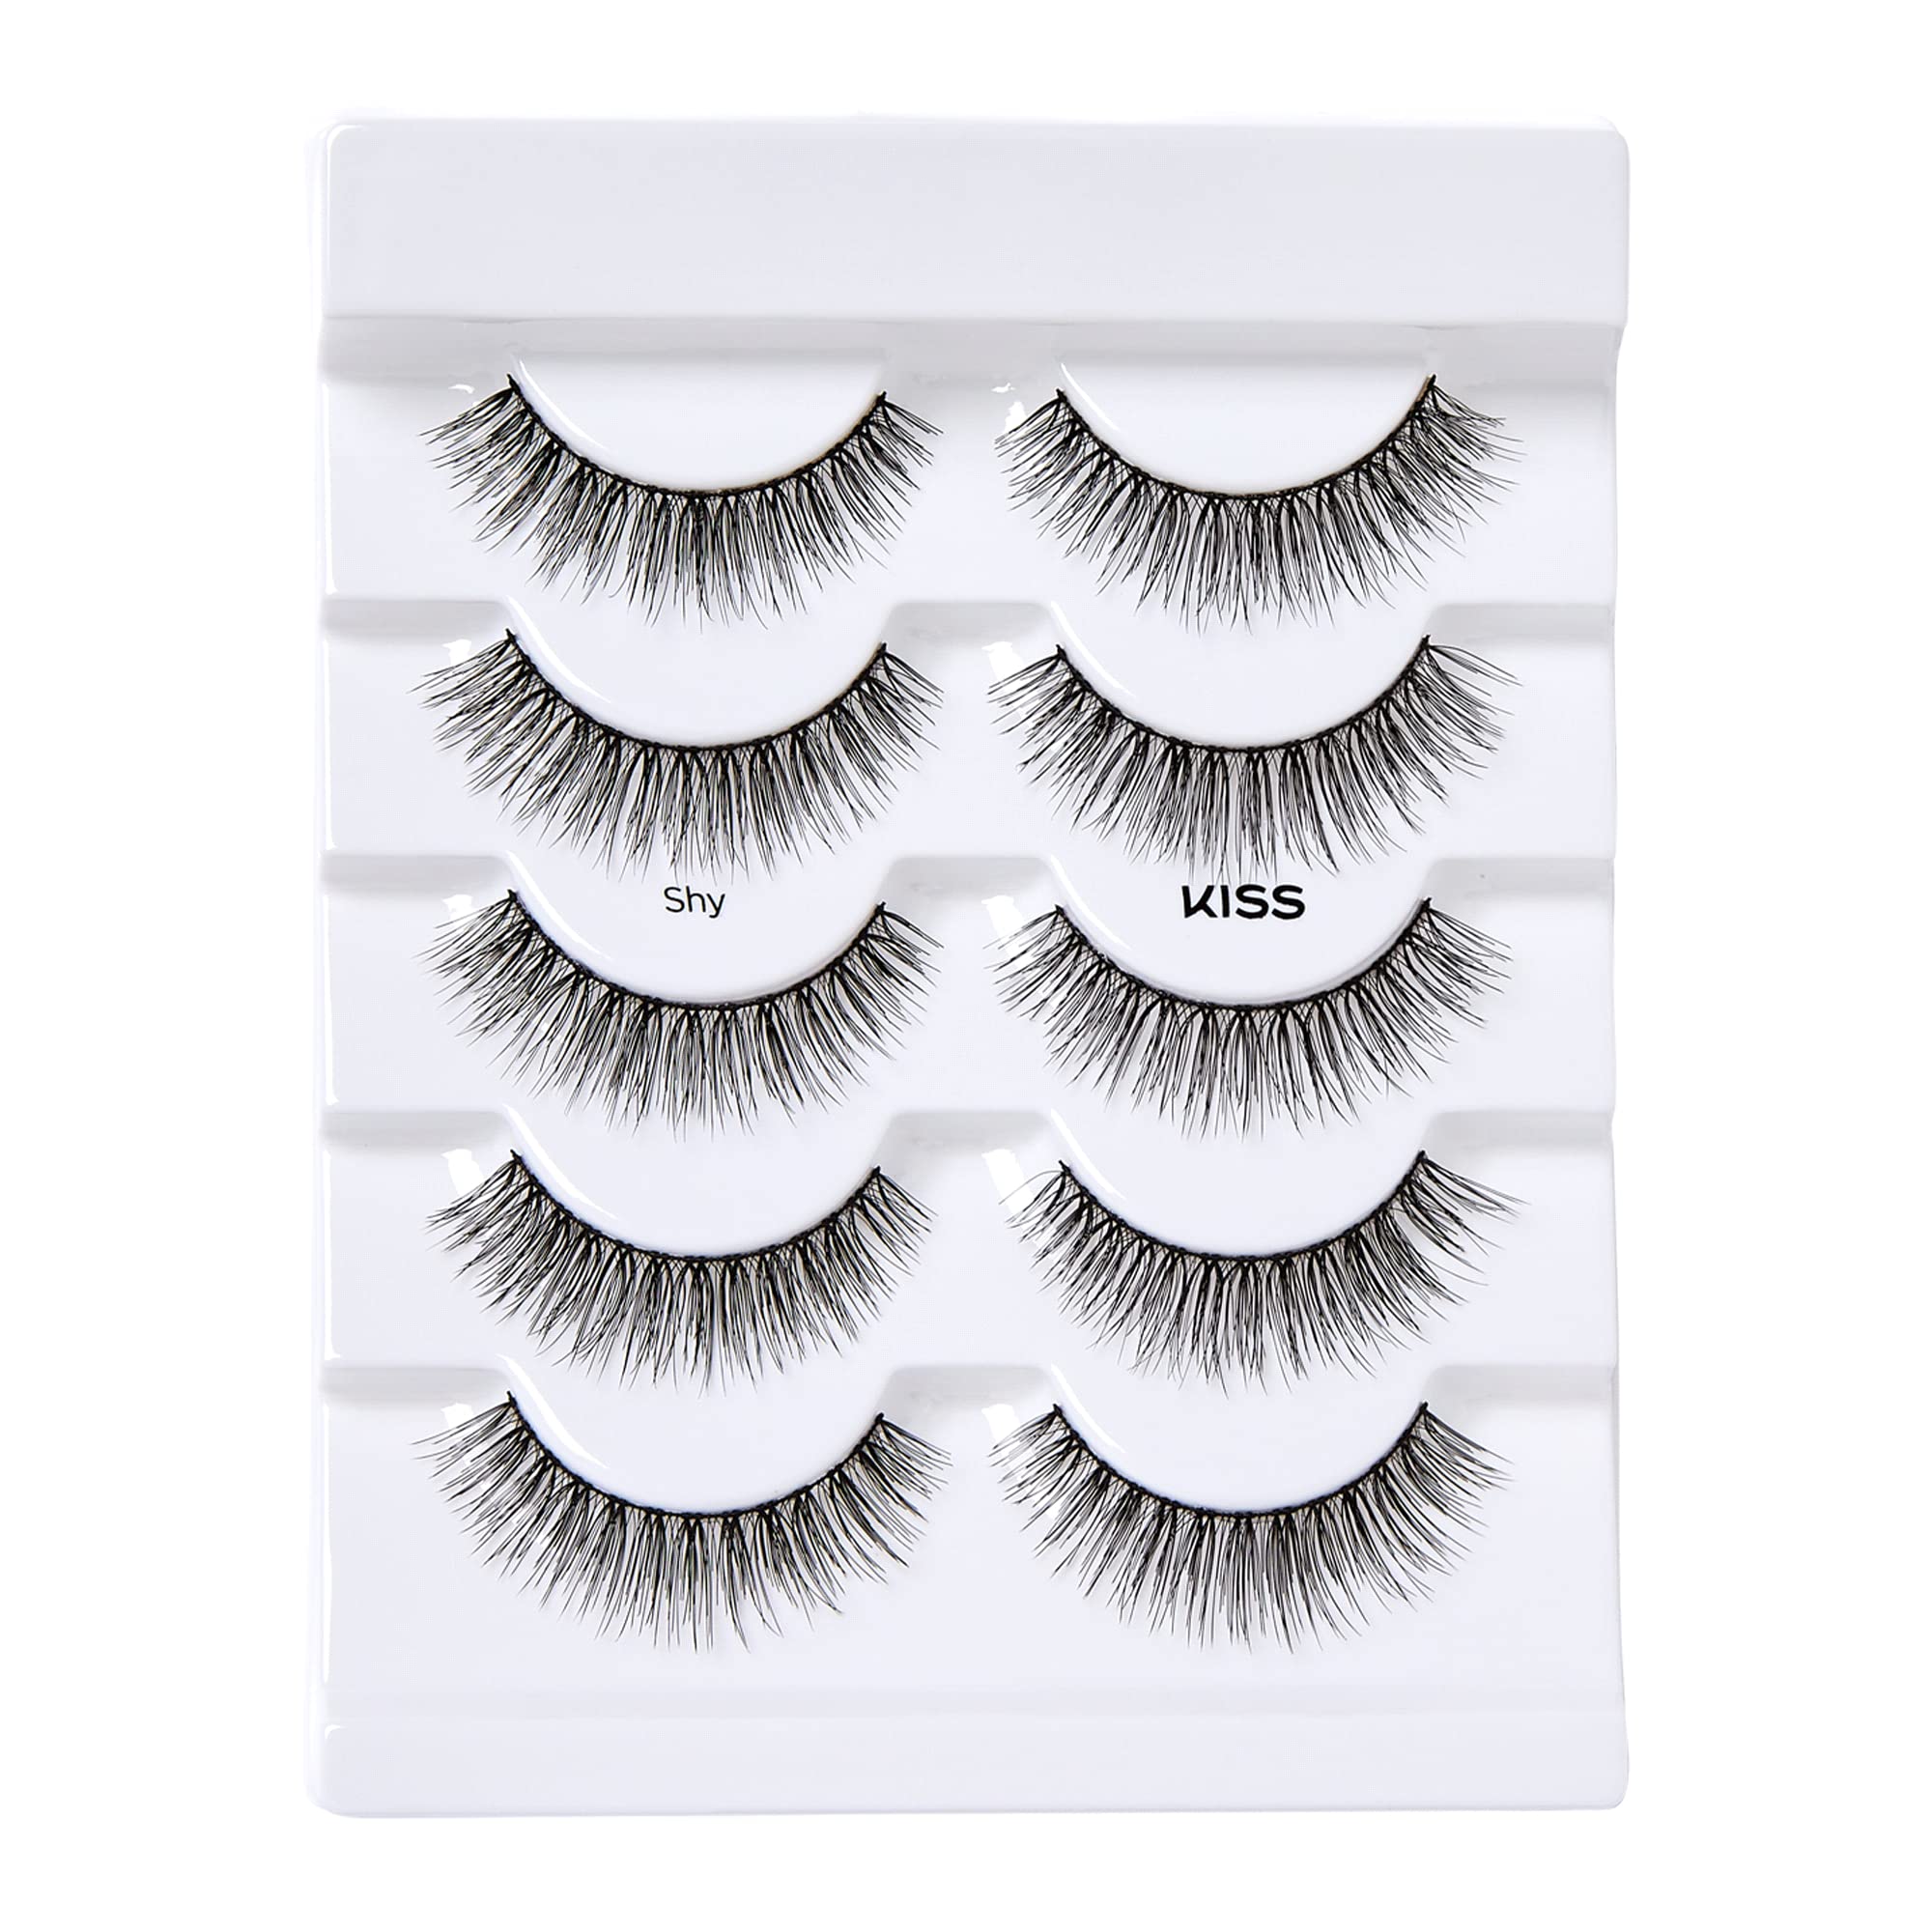 KISS Looks So Natural False Eyelashes Multipack, Lightweight & Comfortable, Tapered End Technology, Reusable, Cruelty-Free, Contact Lens Friendly, Style 'Shy', 5 Pairs Fake Eyelashes